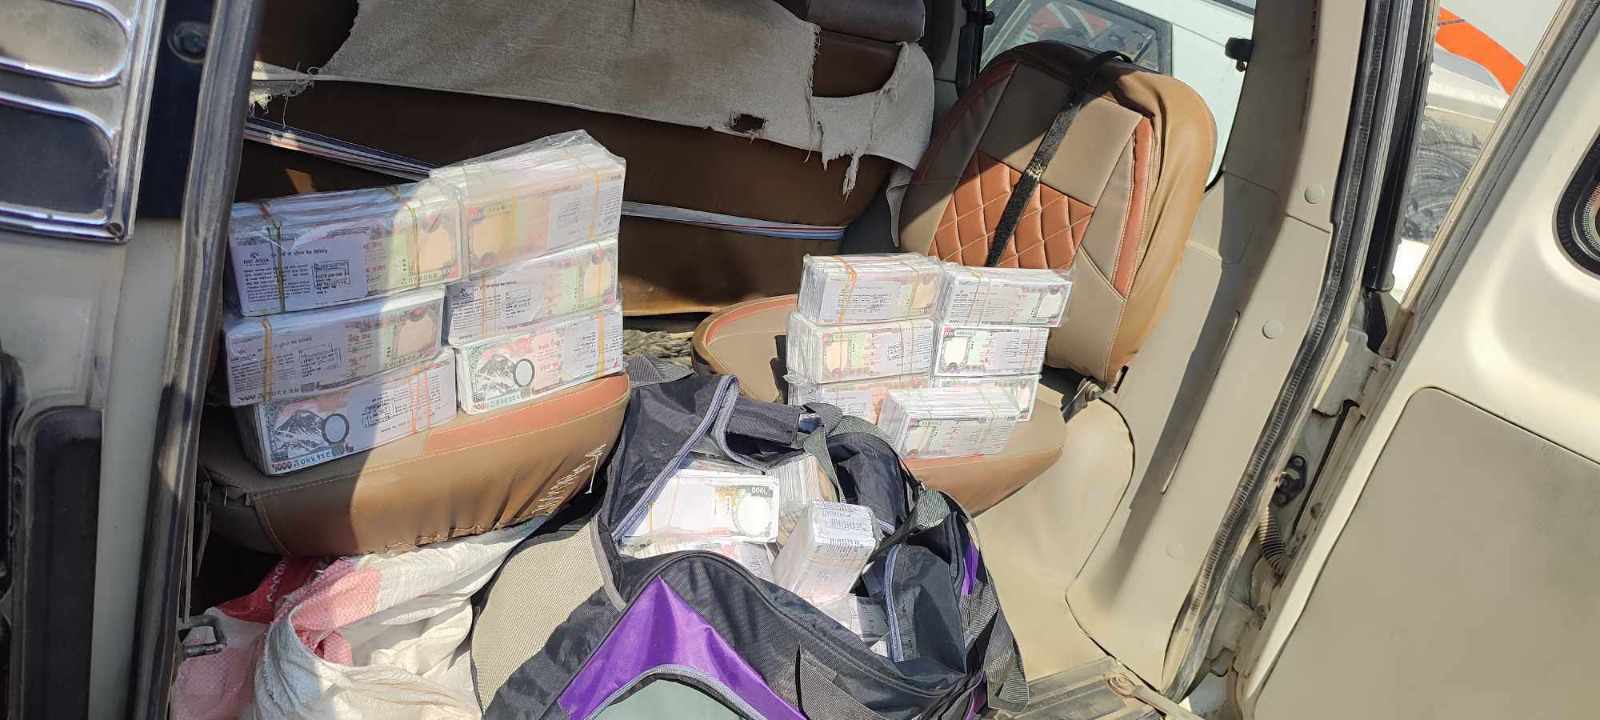 Indian man arrested with fake banknotes worth Rs 18.2 million in Sunsari